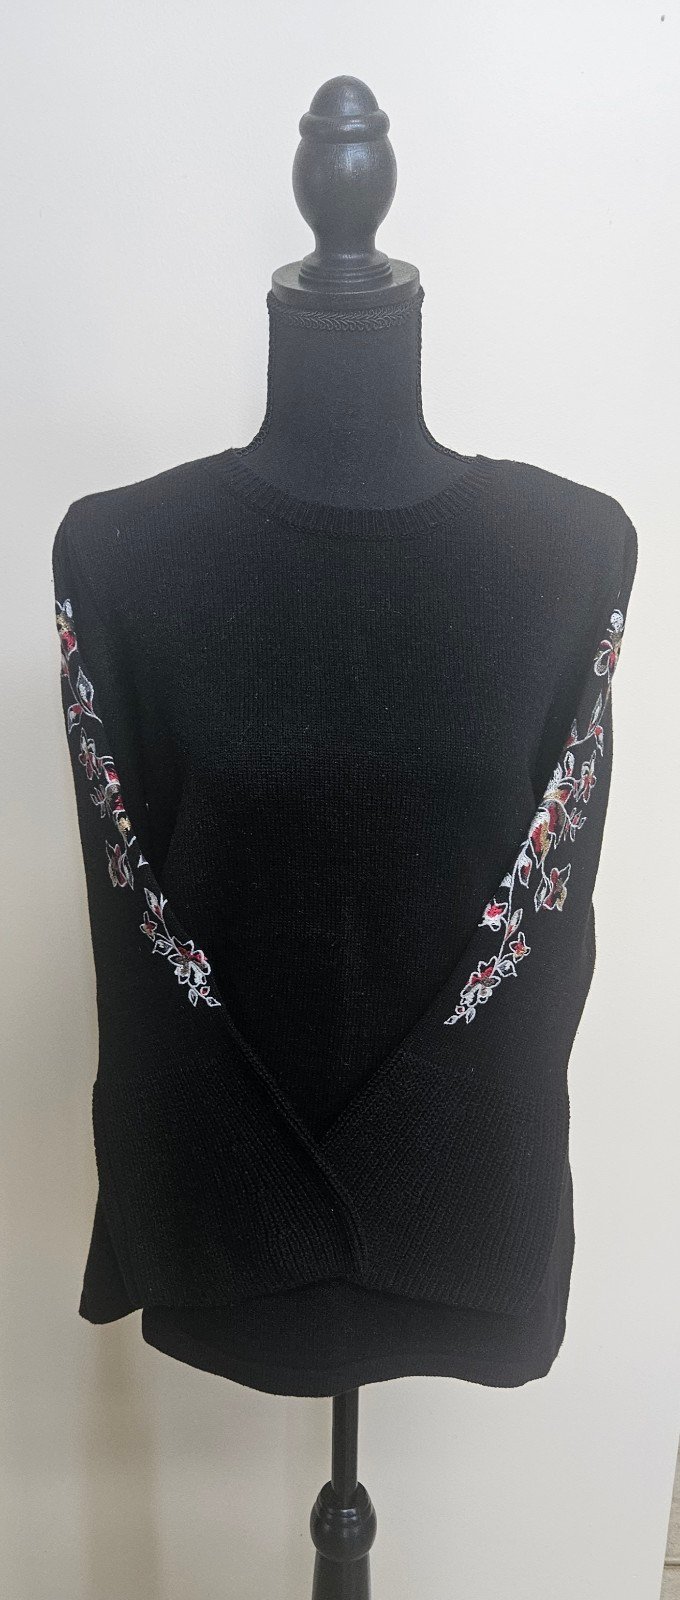 Susan Graver Embroidered Sweater, black floral, size M jrSw3XcR3